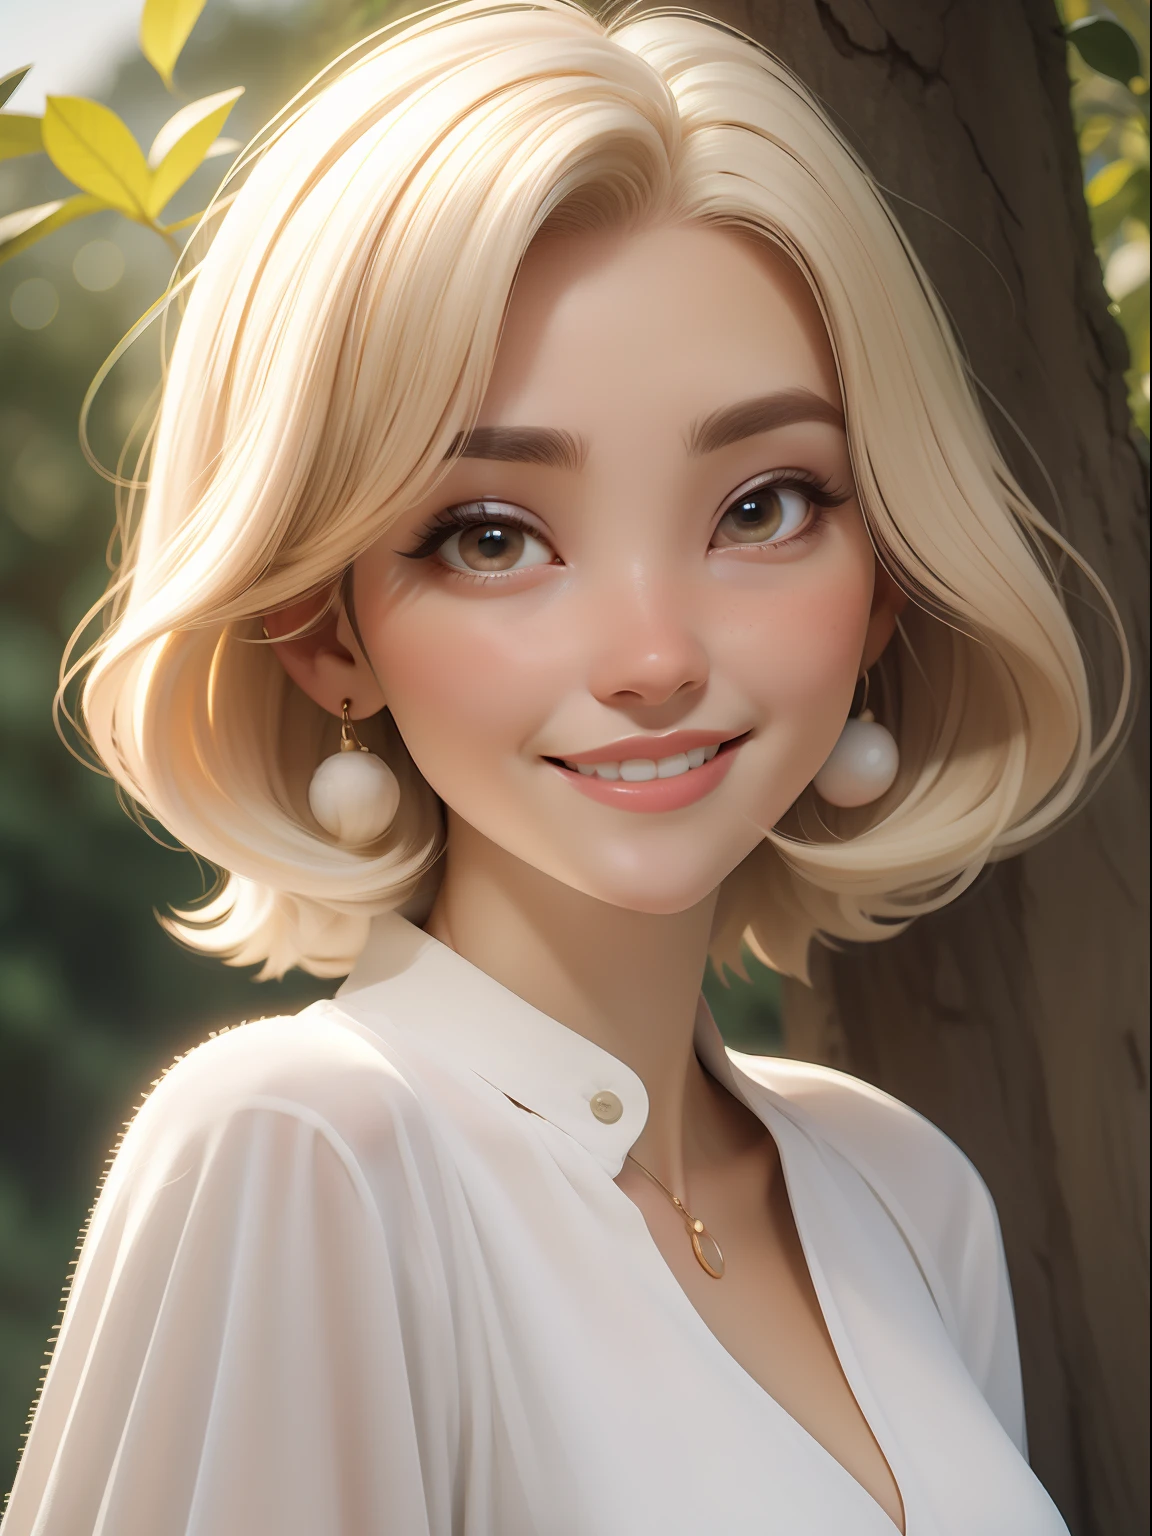 dynamic lighting, photography of a (Beautiful:1.3) (:1.3) (Scandinavian:0.9) (rusa:0.9) Woman, sunny field, (fluffly:1.3), blonde hair, (pale skin:1.1), (soft smiling:1.1), face detailed, detailed gray eyes, Detailed texture skin, red mini dress, in park, ray of sunlight, Por Ilya Kuvshinov, alessio albi, nina masic, sharp focus, natural lighting, Subsurface scattering, f2, 35 mm, filmic grain, (freckles:0.2), (skin imperfections:1.2), open pores, ornate